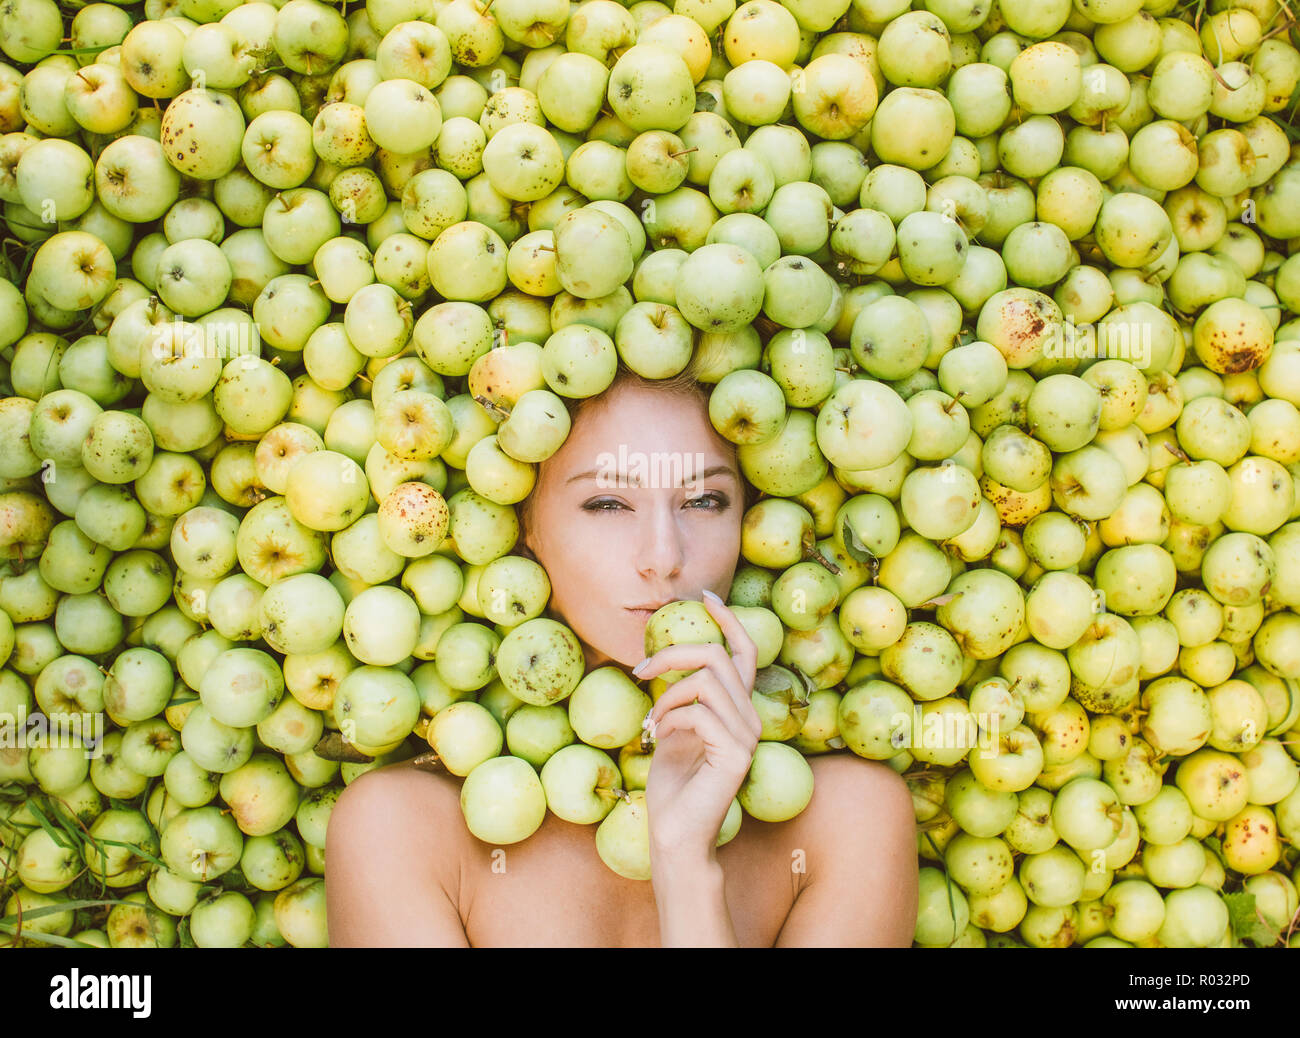 Portrait of beautiful girl that lies in the green apples, apples near the face, kissing apple Stock Photo